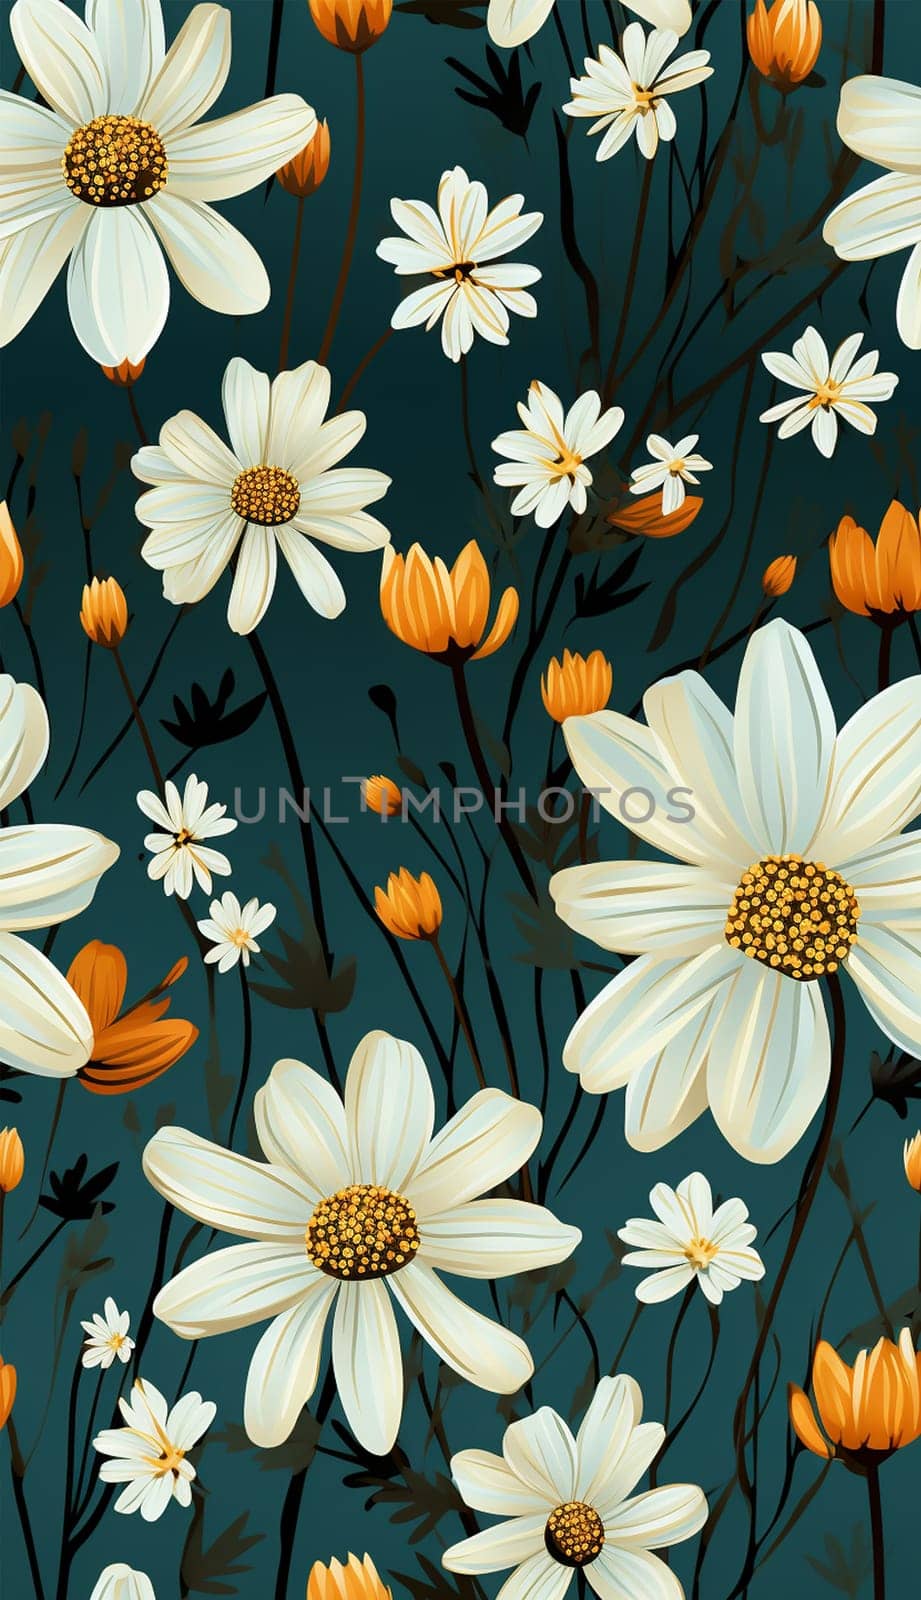 Daisy background. Trendy Hand drawn Wild Meadow florals , Flower bouquet illustration Seamless Pattern Design, Design for fashion , fabric, textile, wallpaper, cover, web , wrapping and all prints by Annebel146